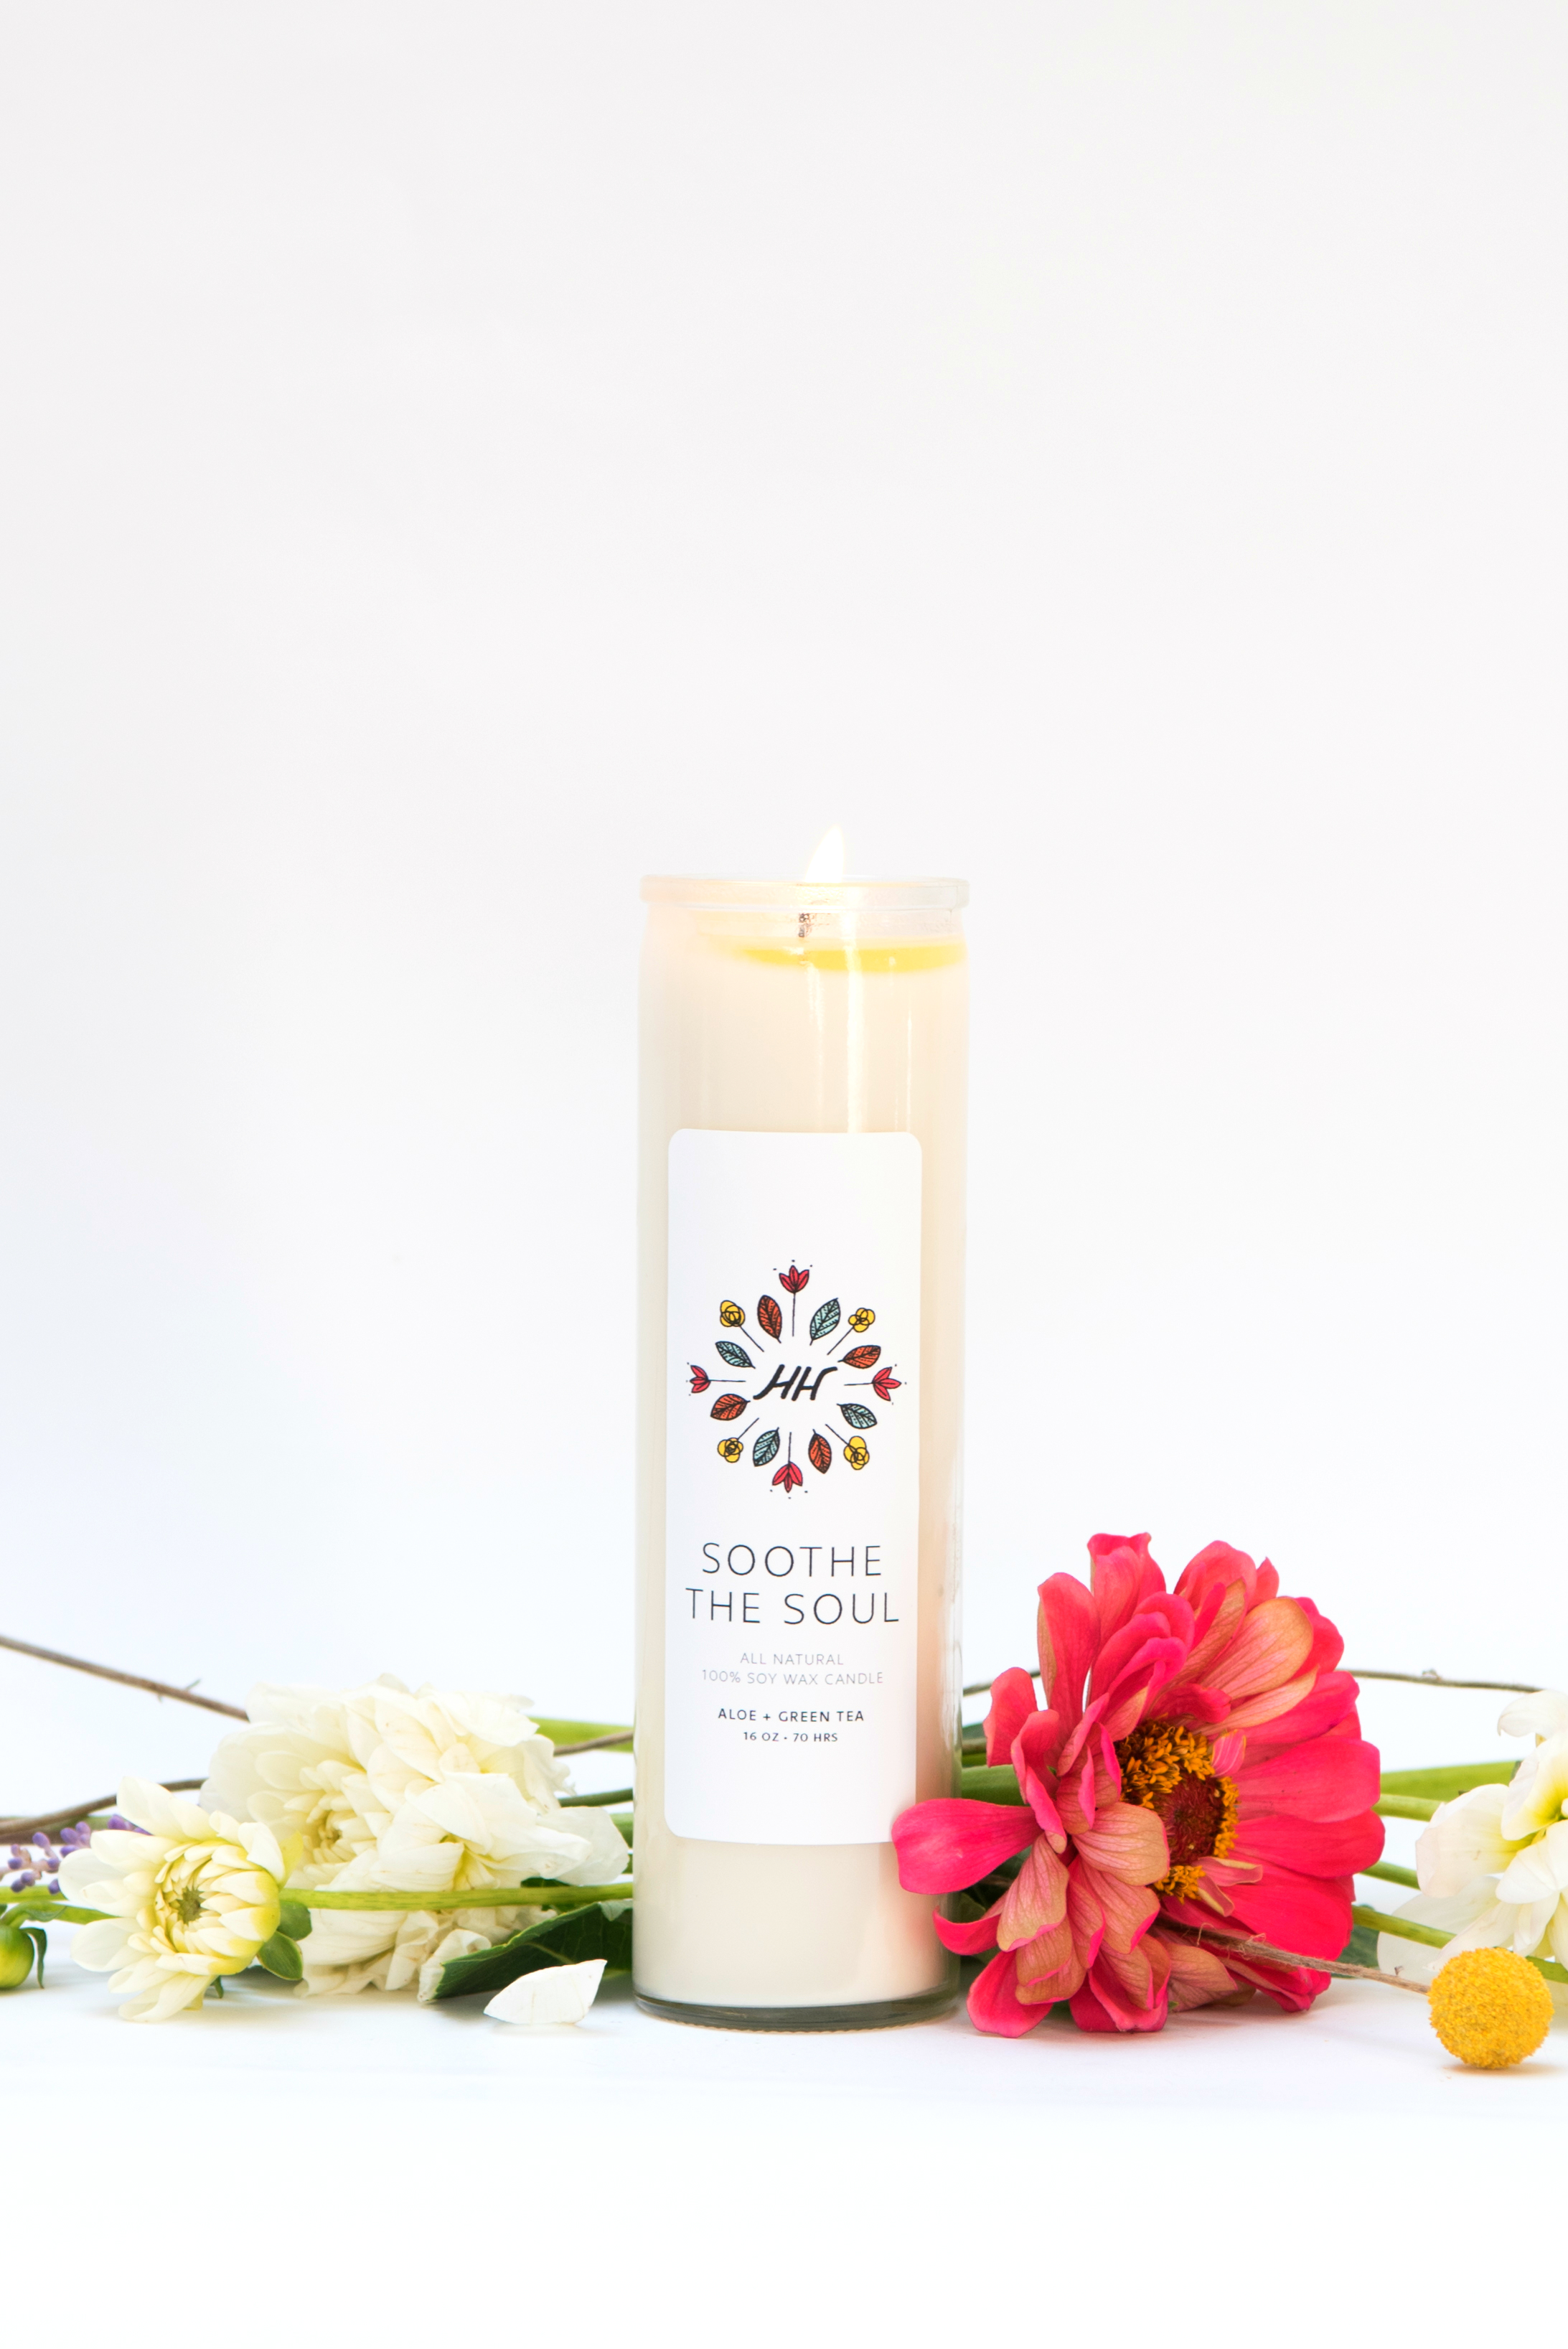 Soothe the Soul Mantra Candle